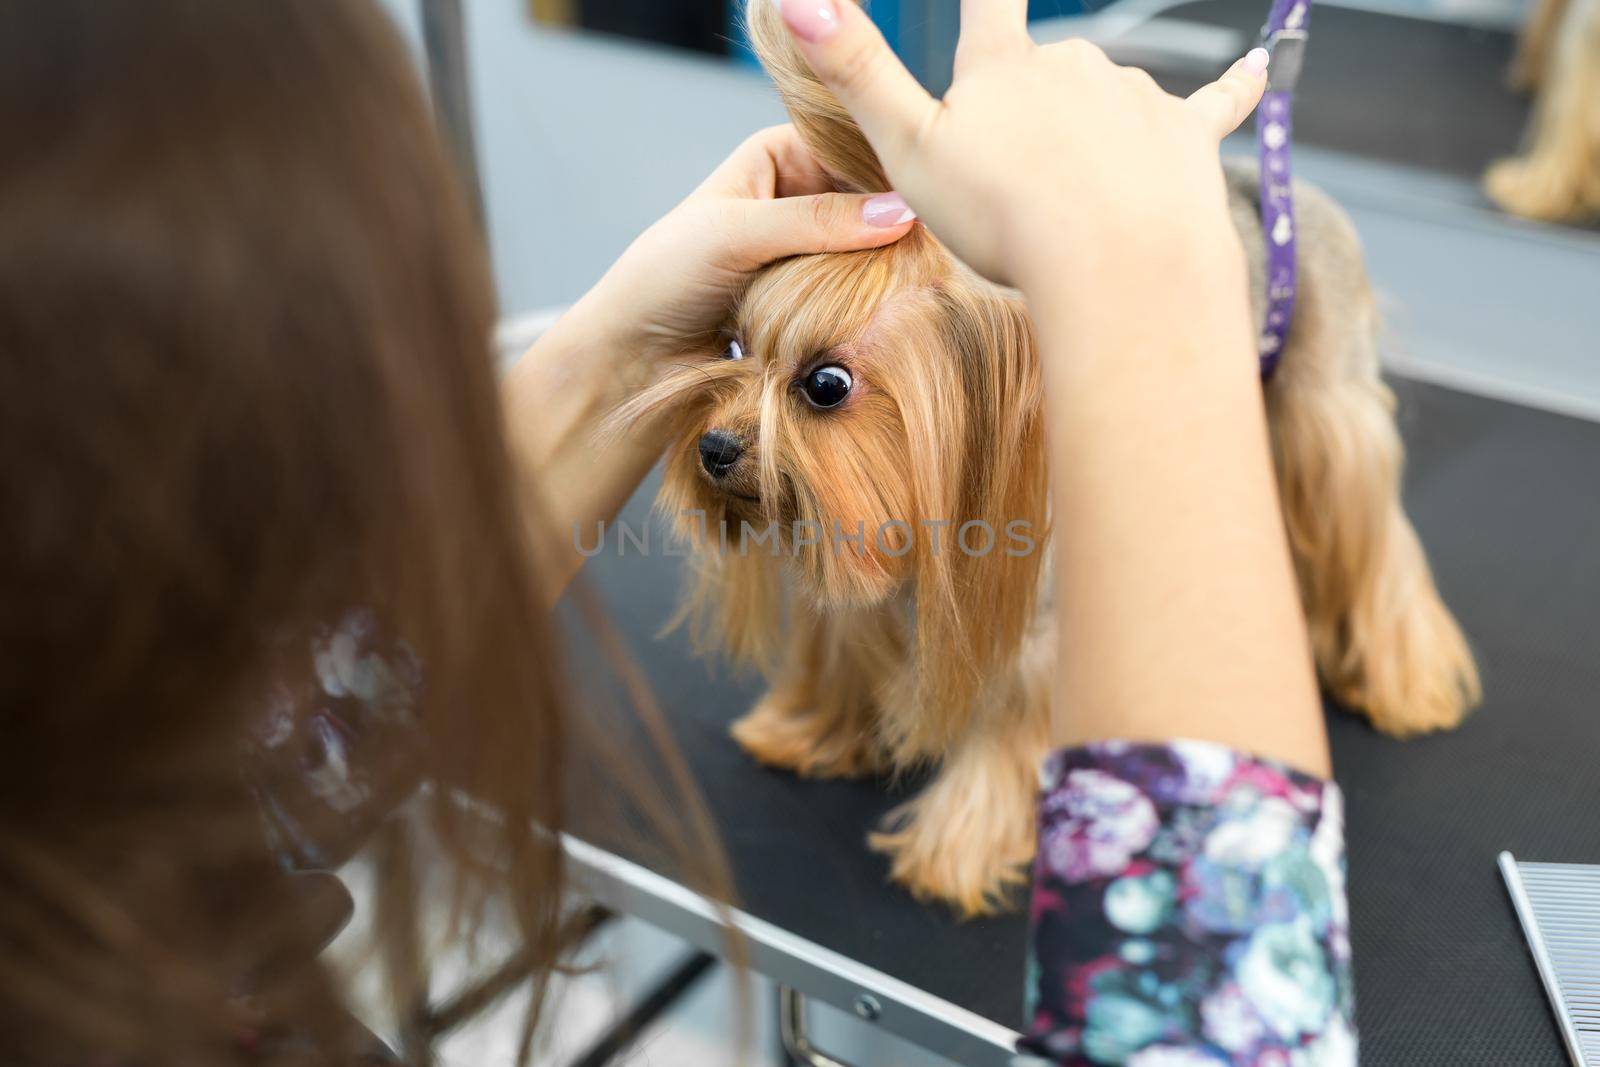 groomer puts a bow on the dog's head. by StudioPeace